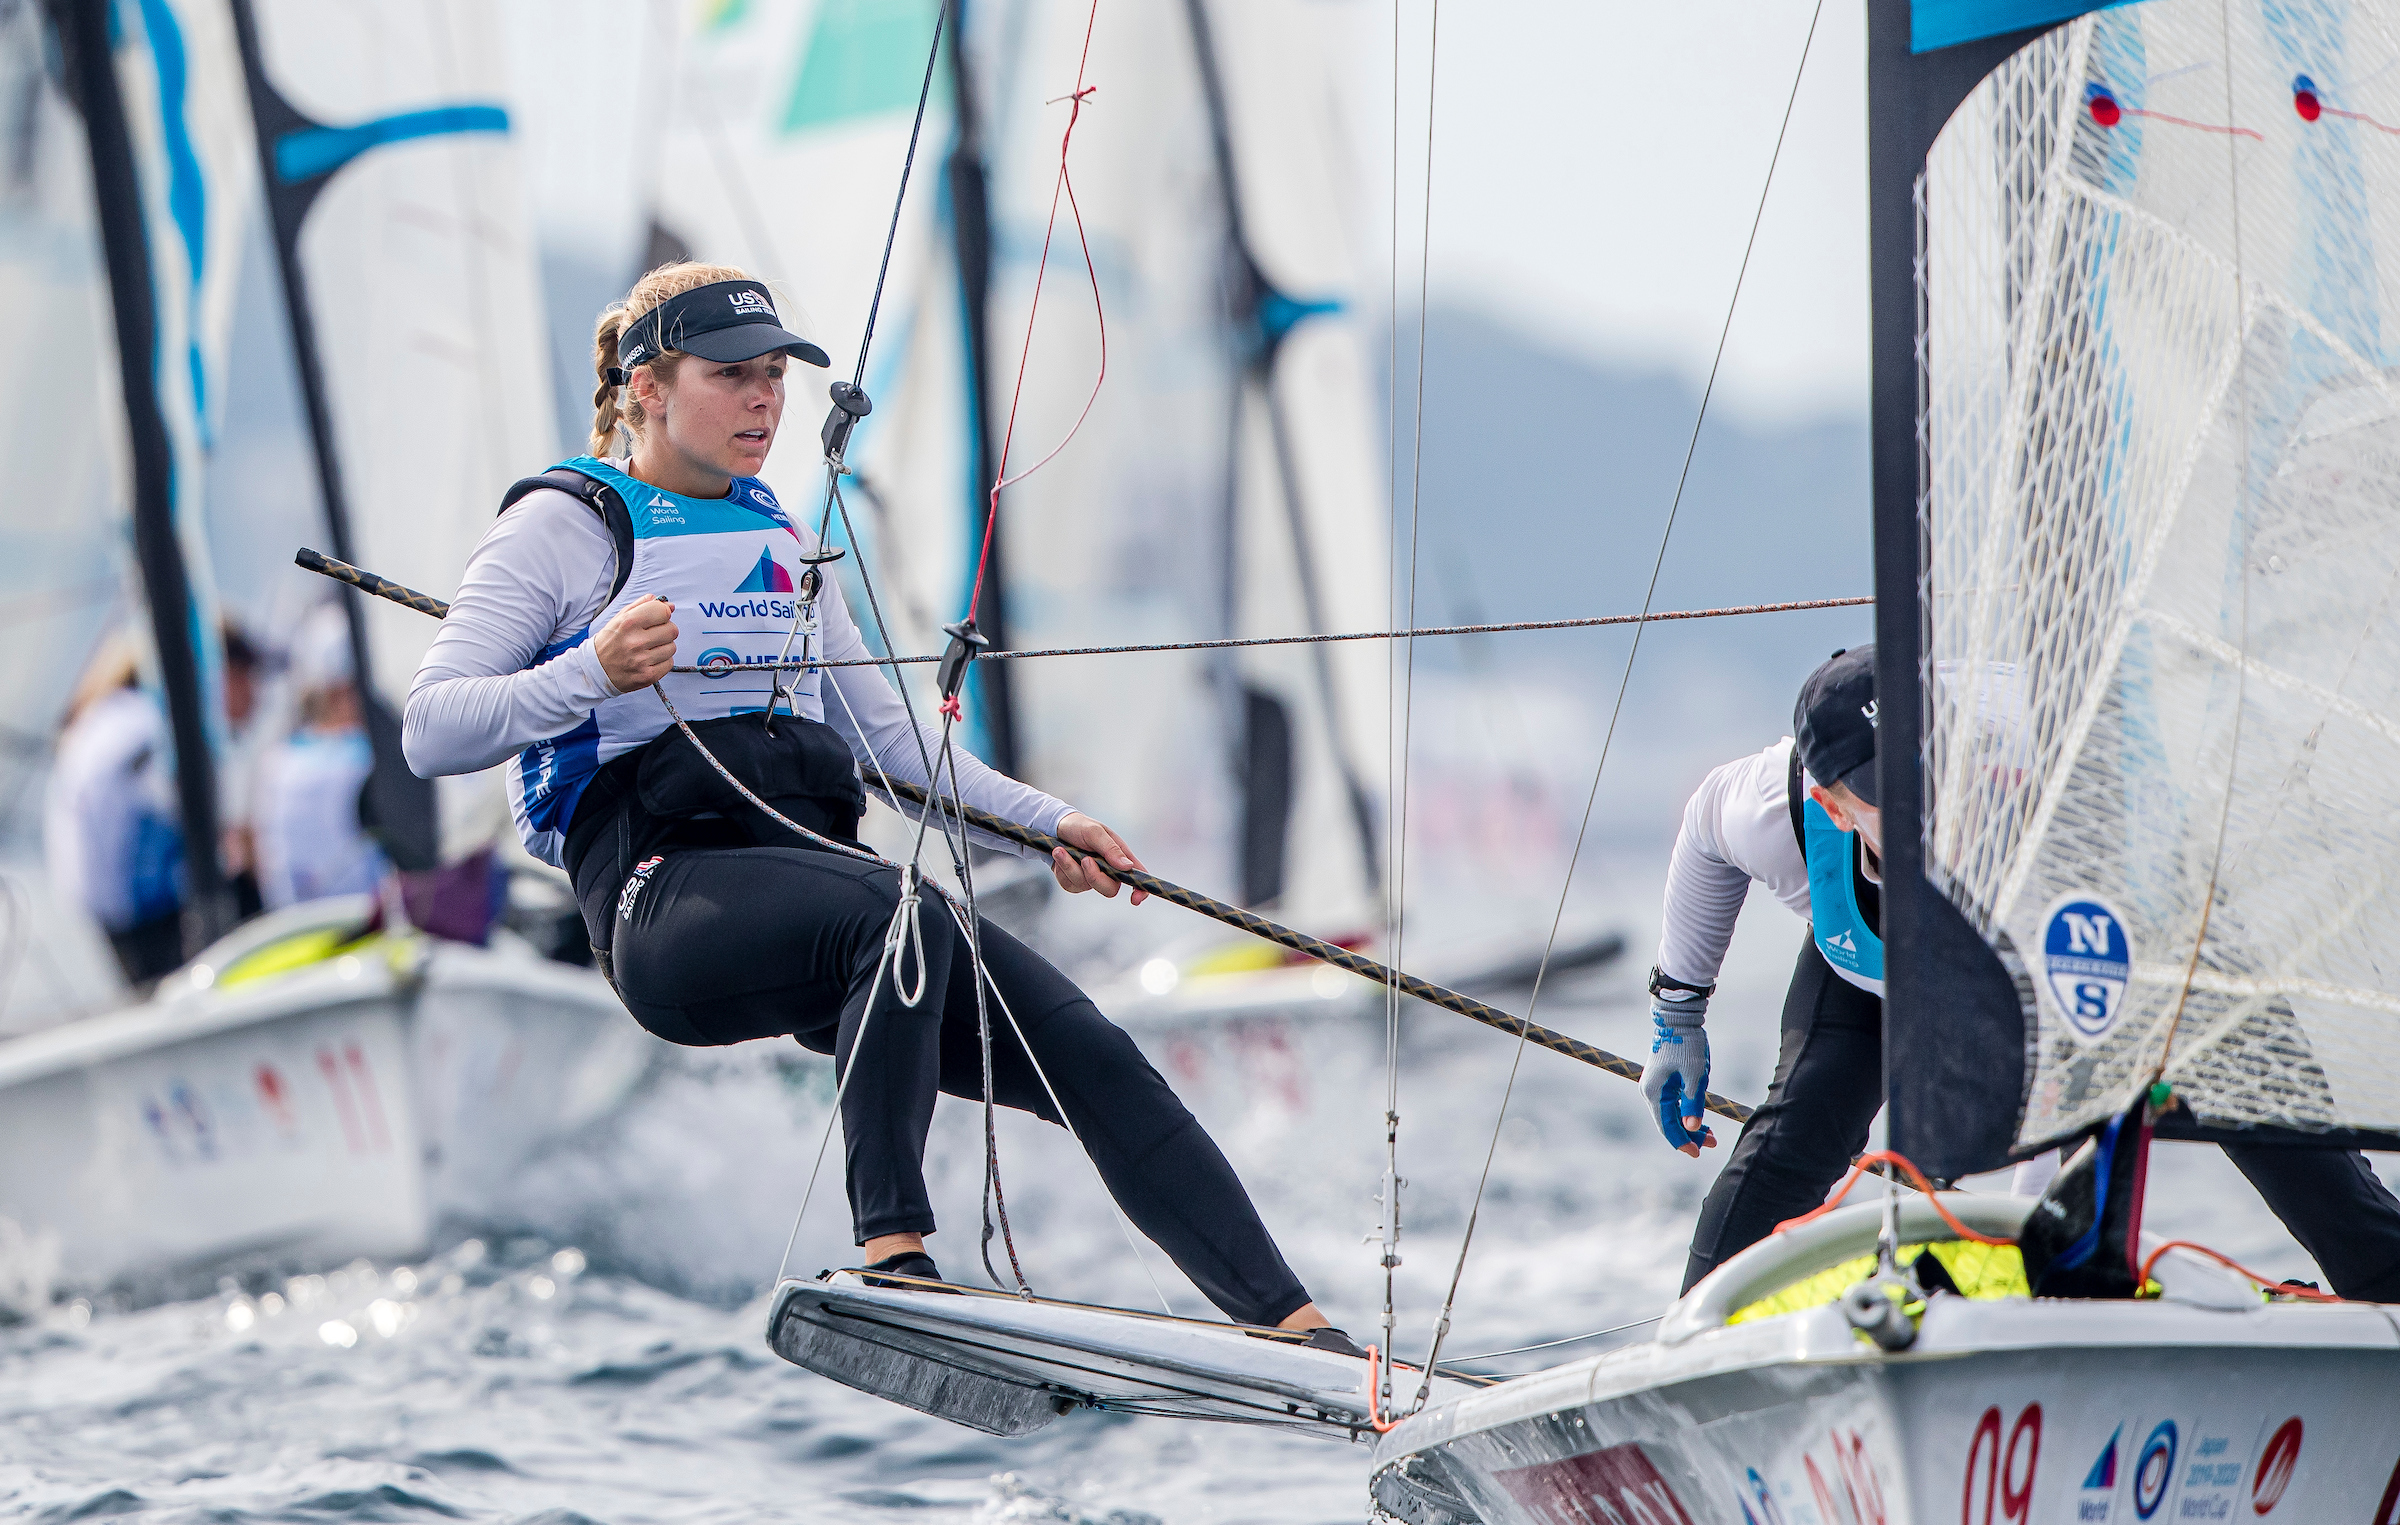 Stephanie Roble competes in Enoshima, Japan in round one of the 2020 World Cup Series. (©Jesus Renedo / Sailing Energy / World Sailing, 27 August, 2019)